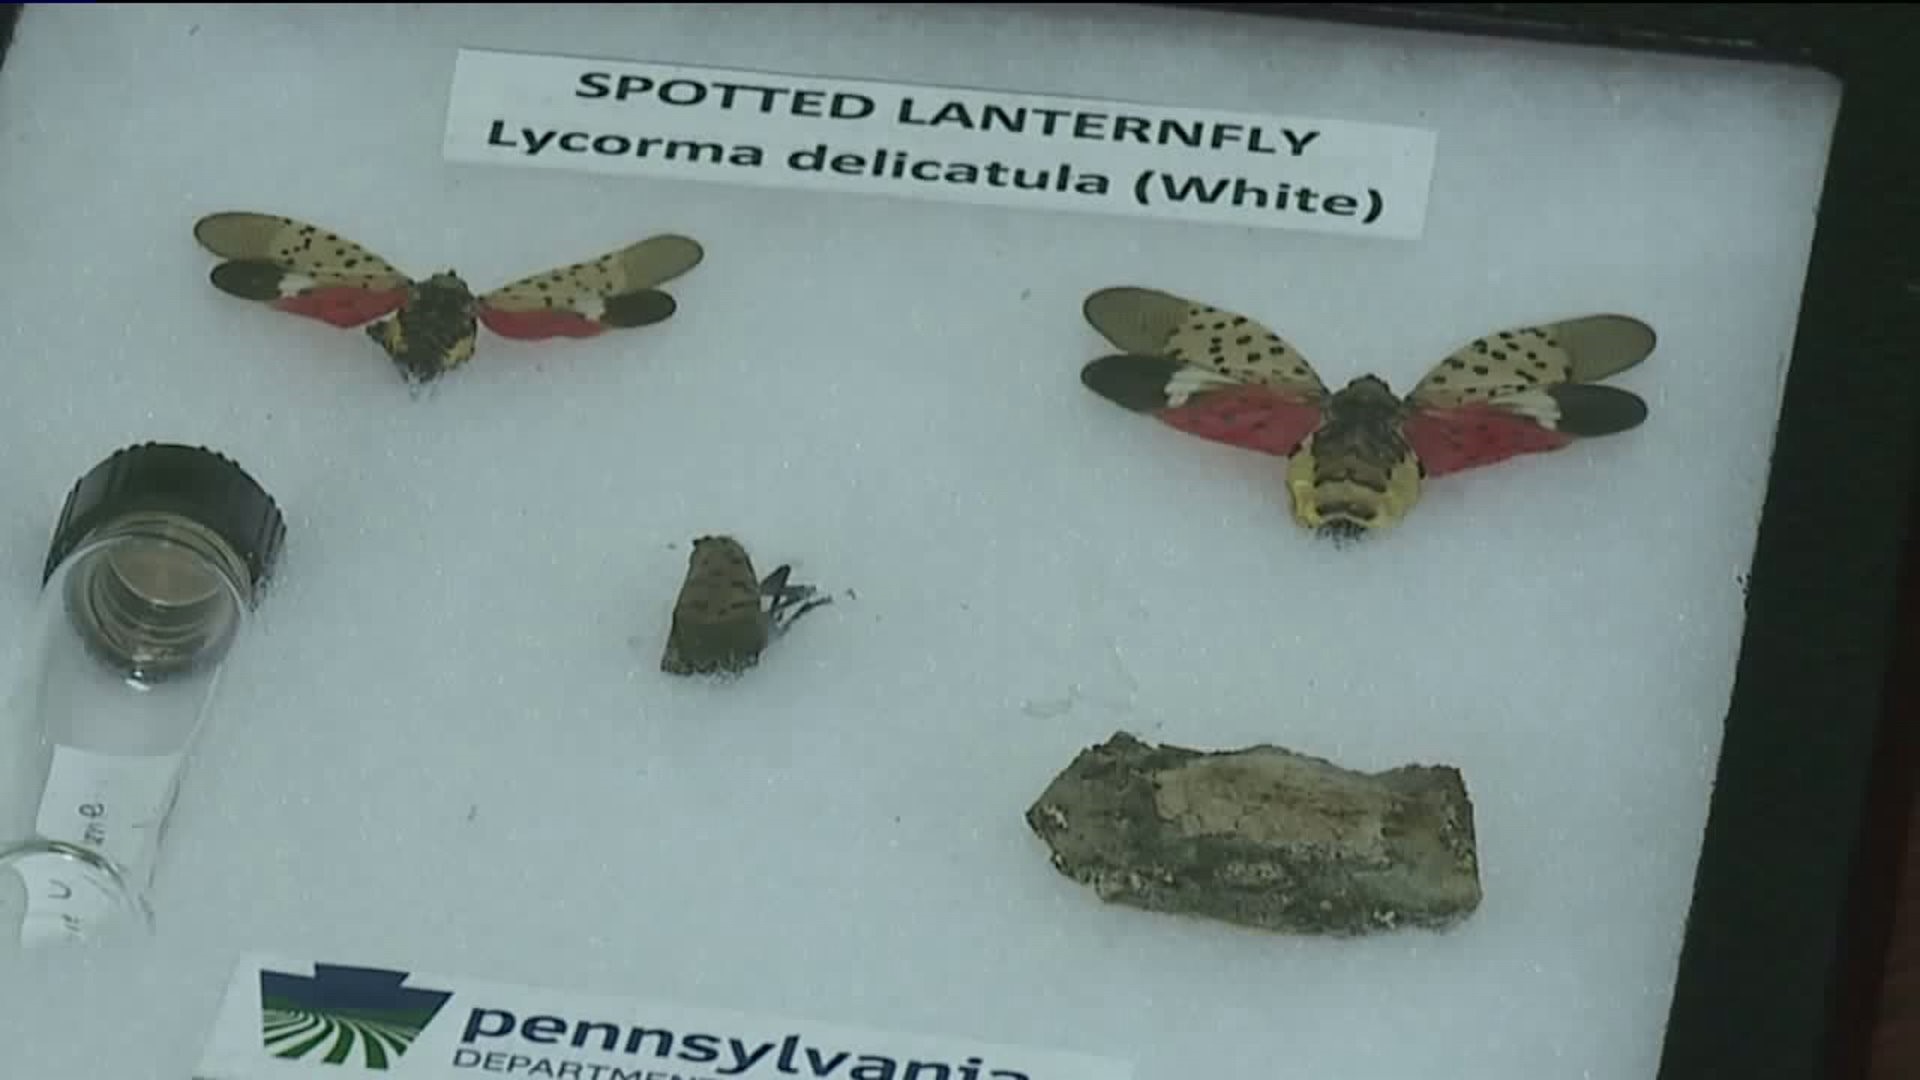 Spotted Lanternfly Causing Concern for Farmers in Schuylkill County